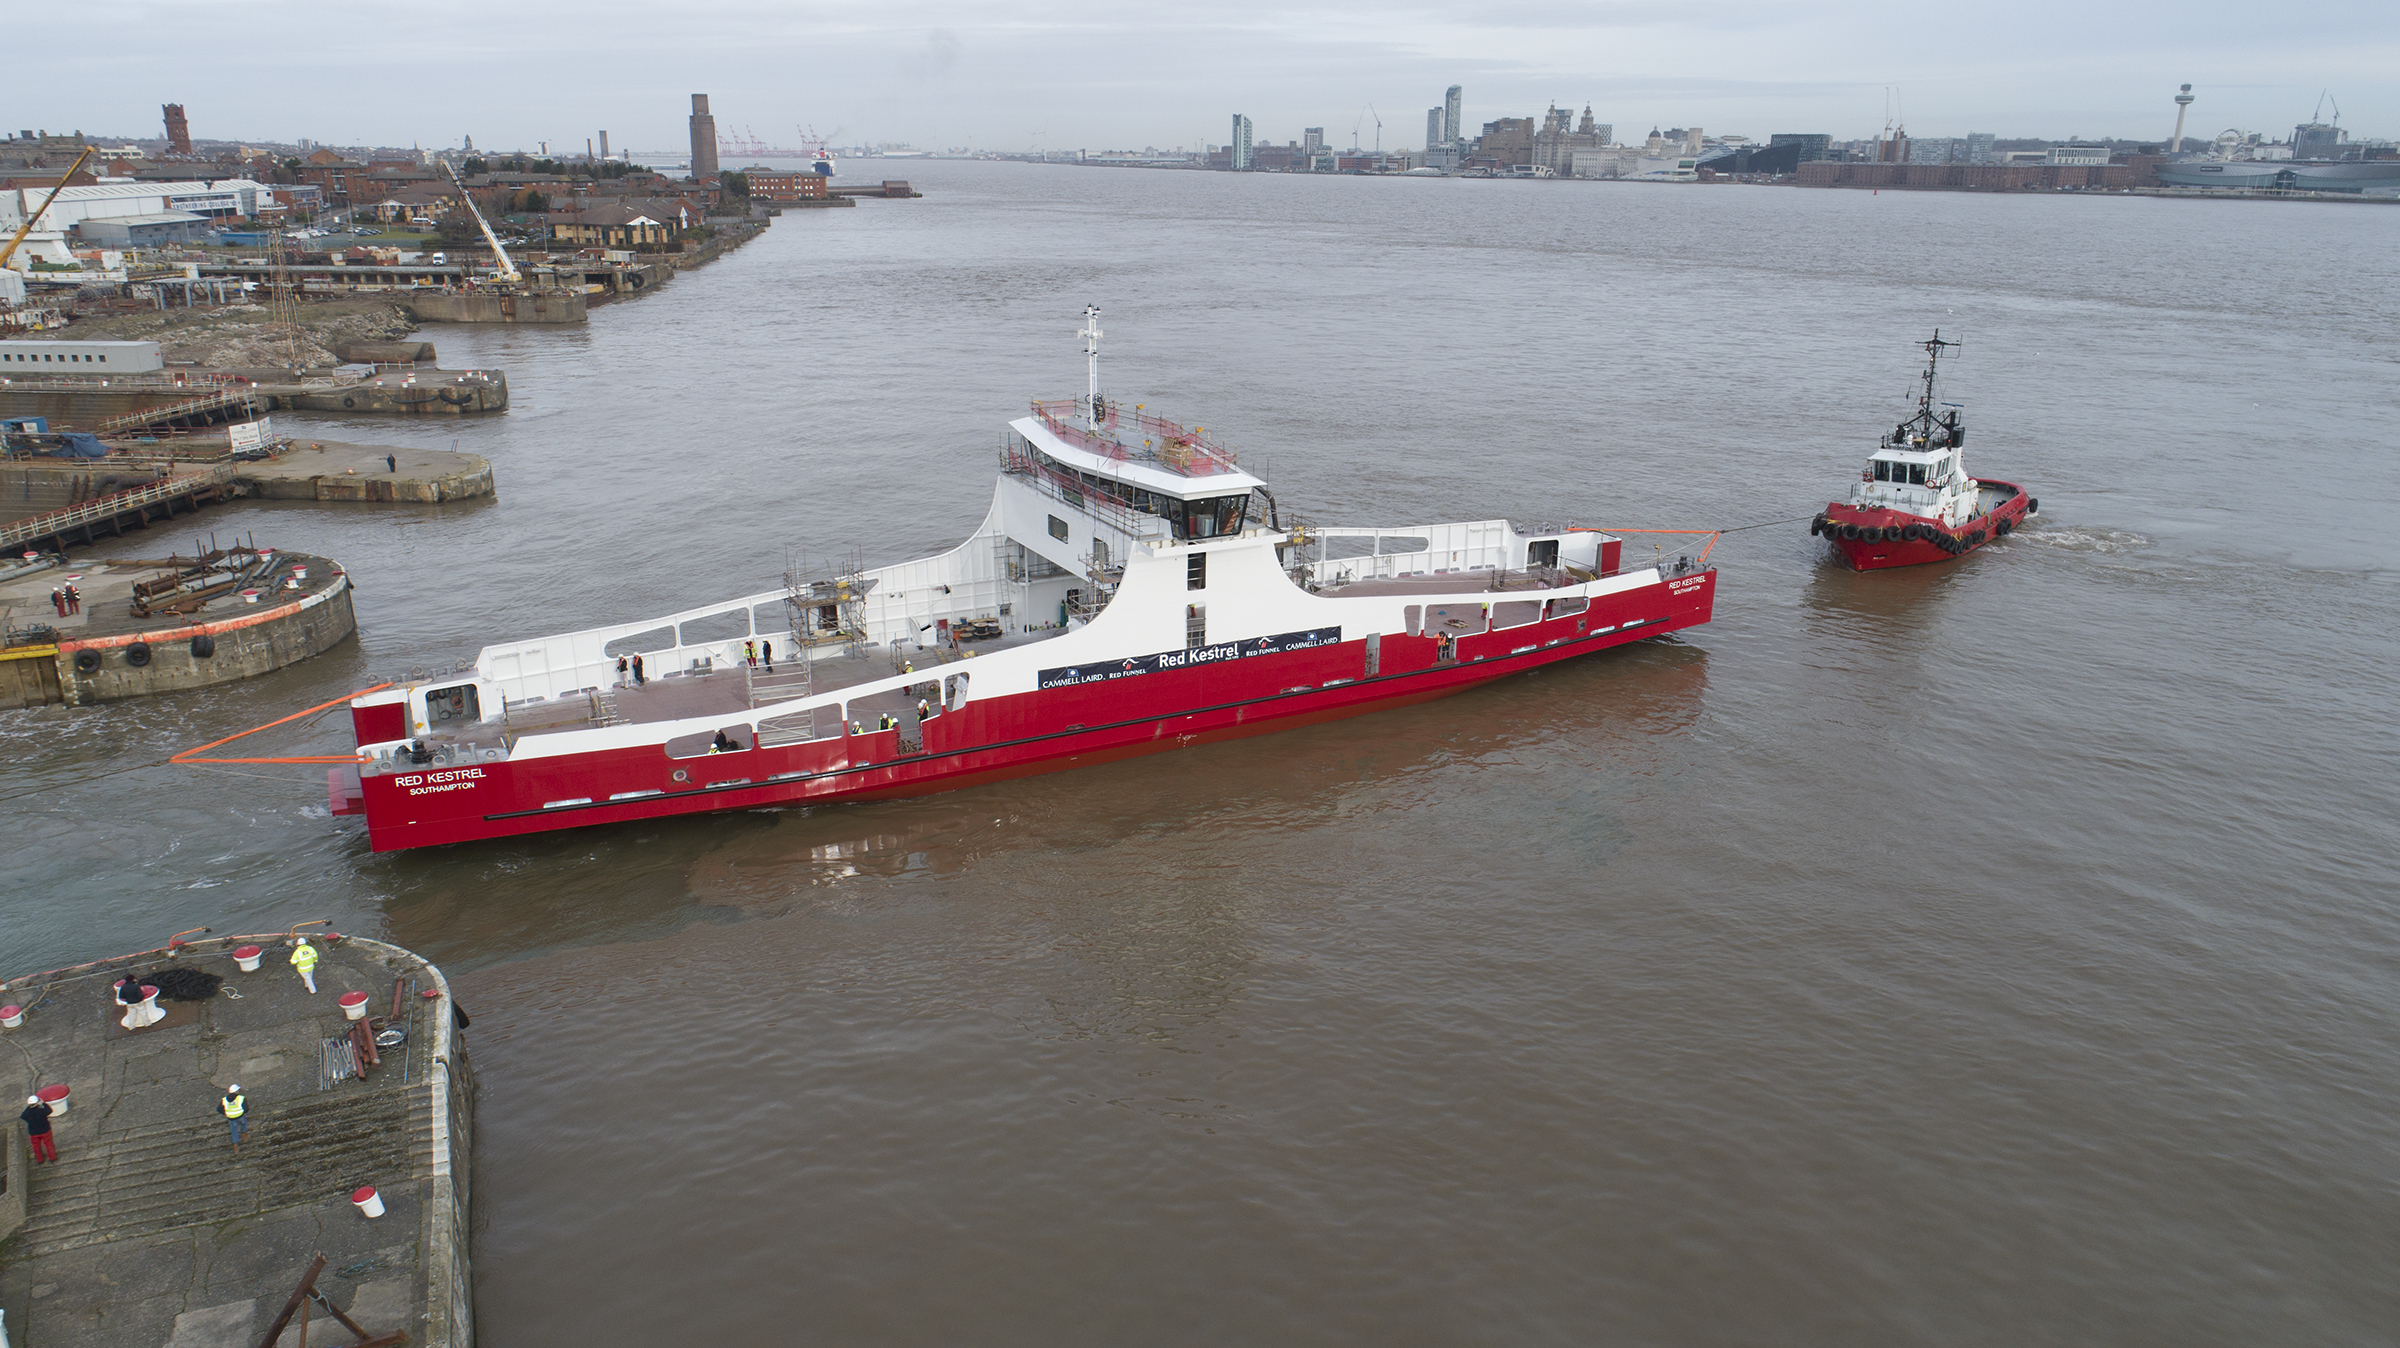 Cammell Laird Splashes New Ship for Red Funnel - Offshore Energy